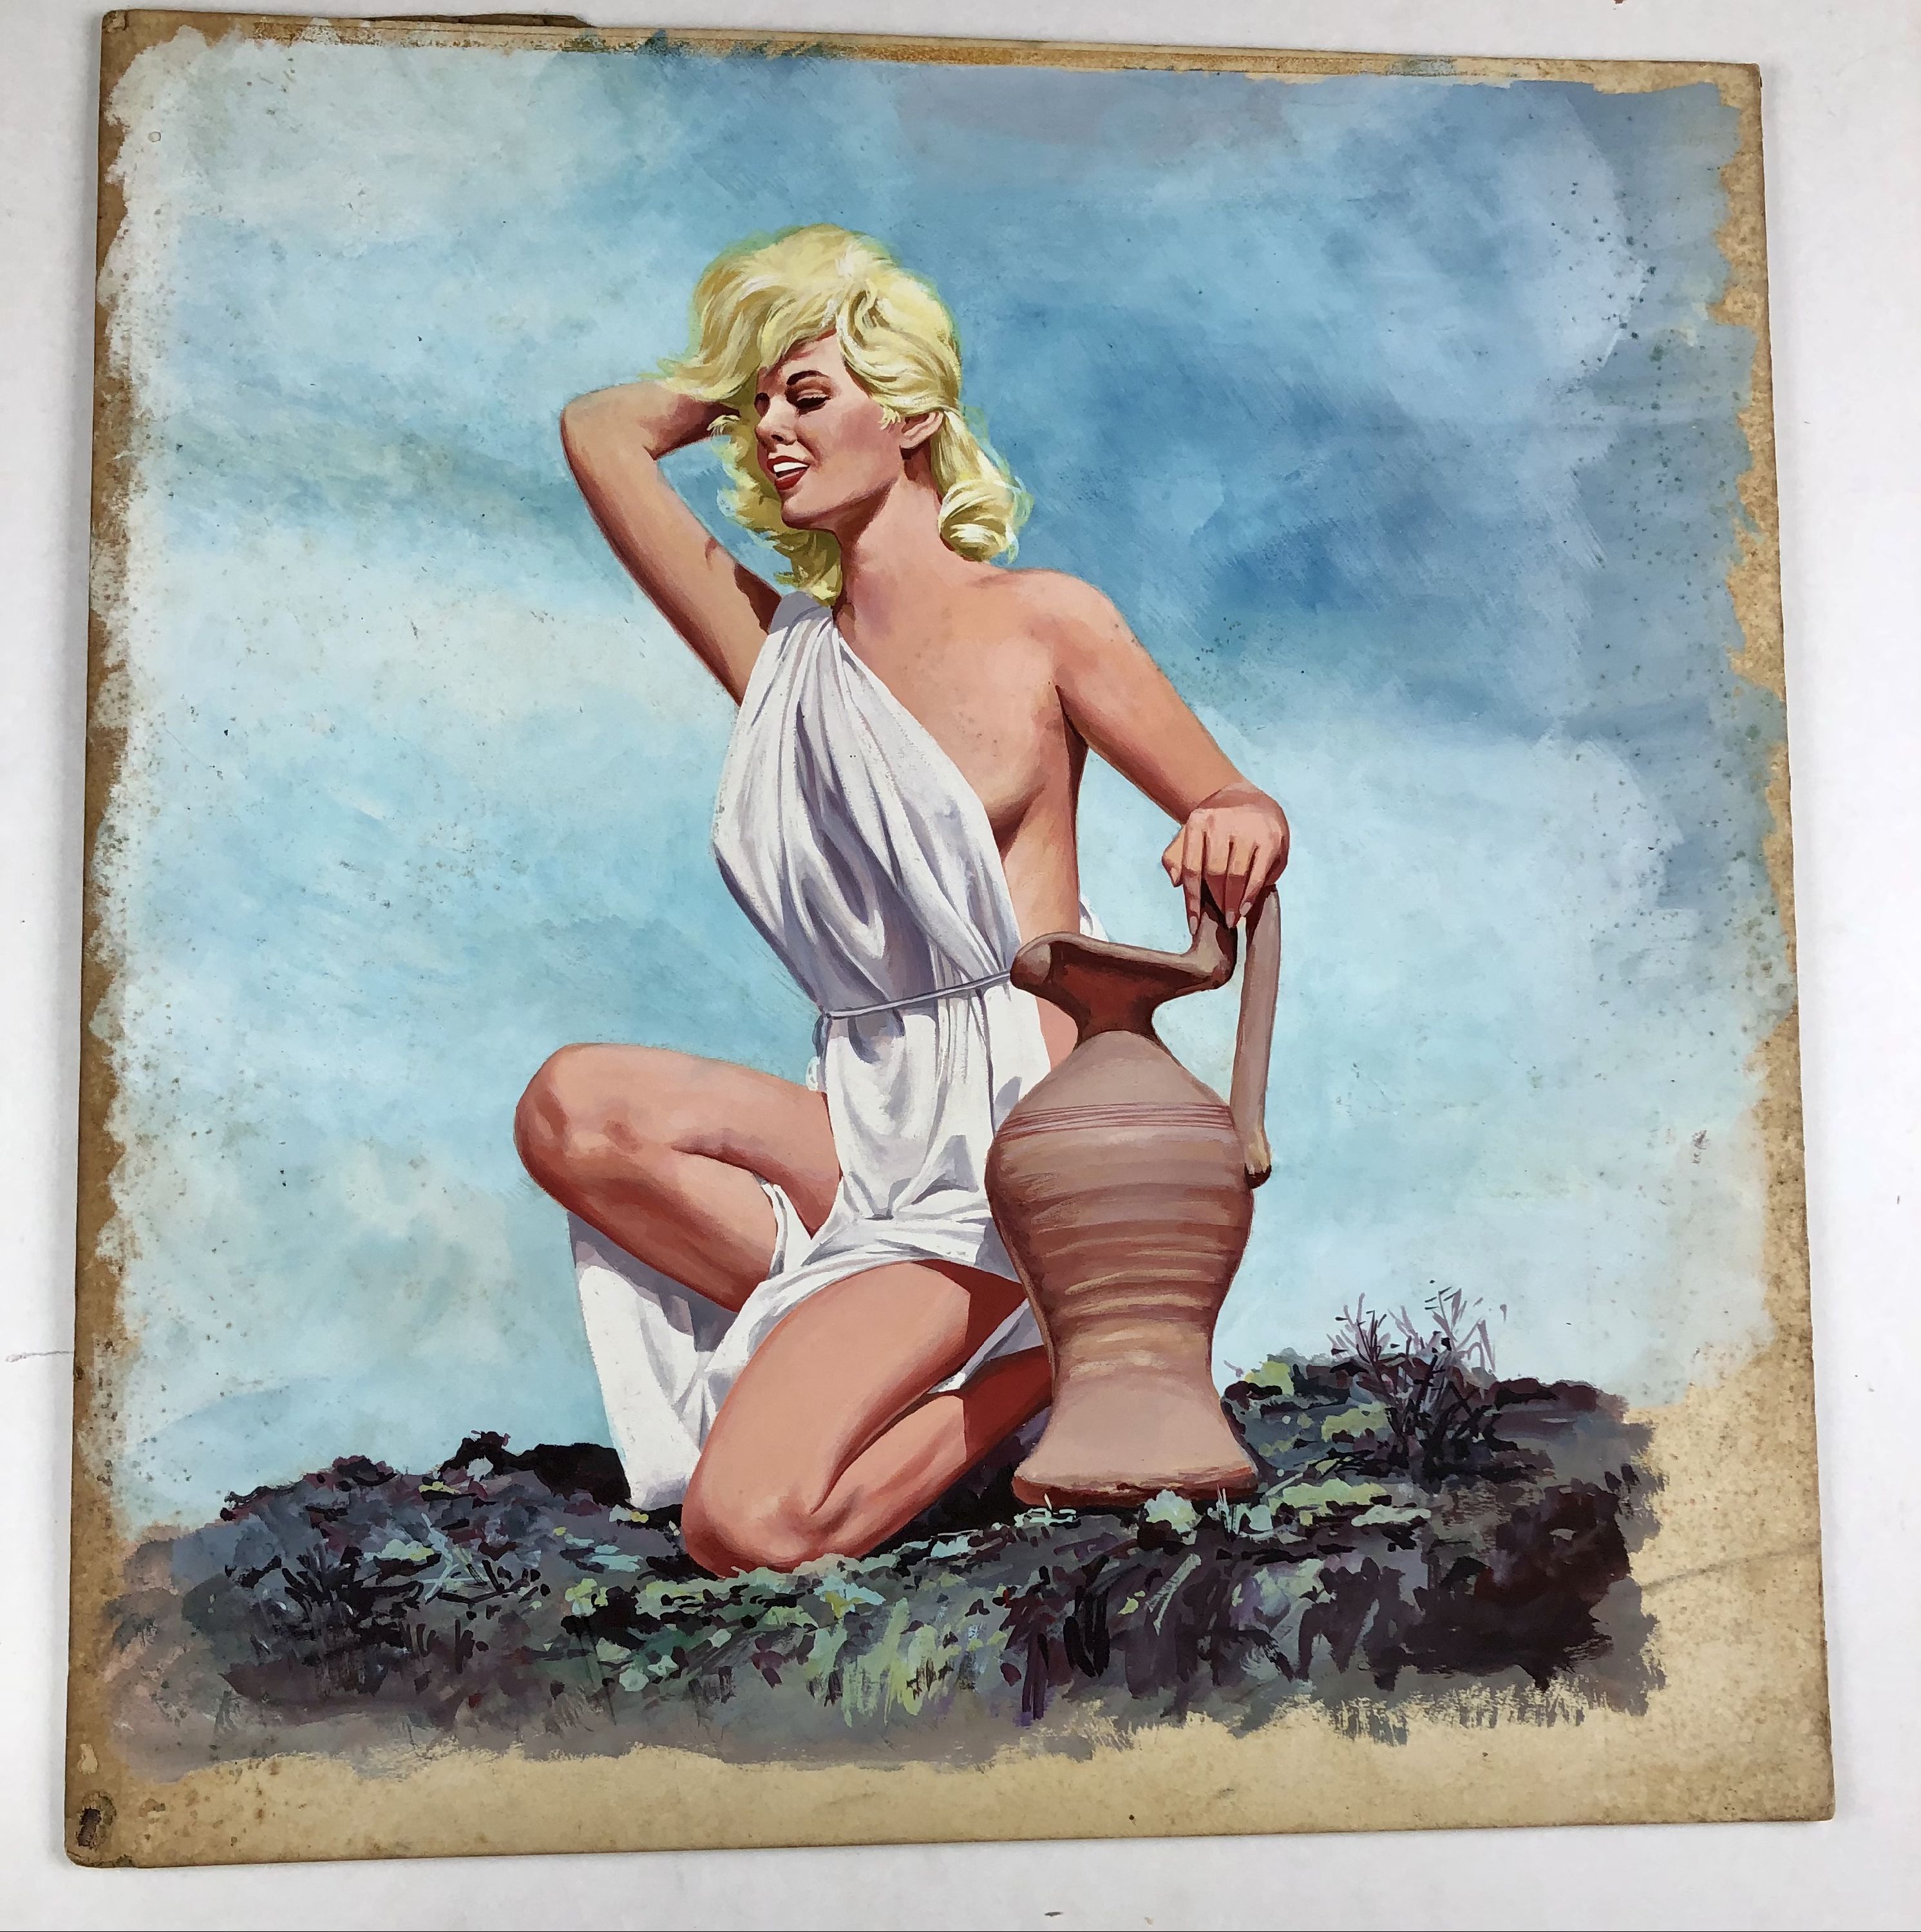 Bunny Yeager, model, in toga kneeling next to clay vase against blue sky